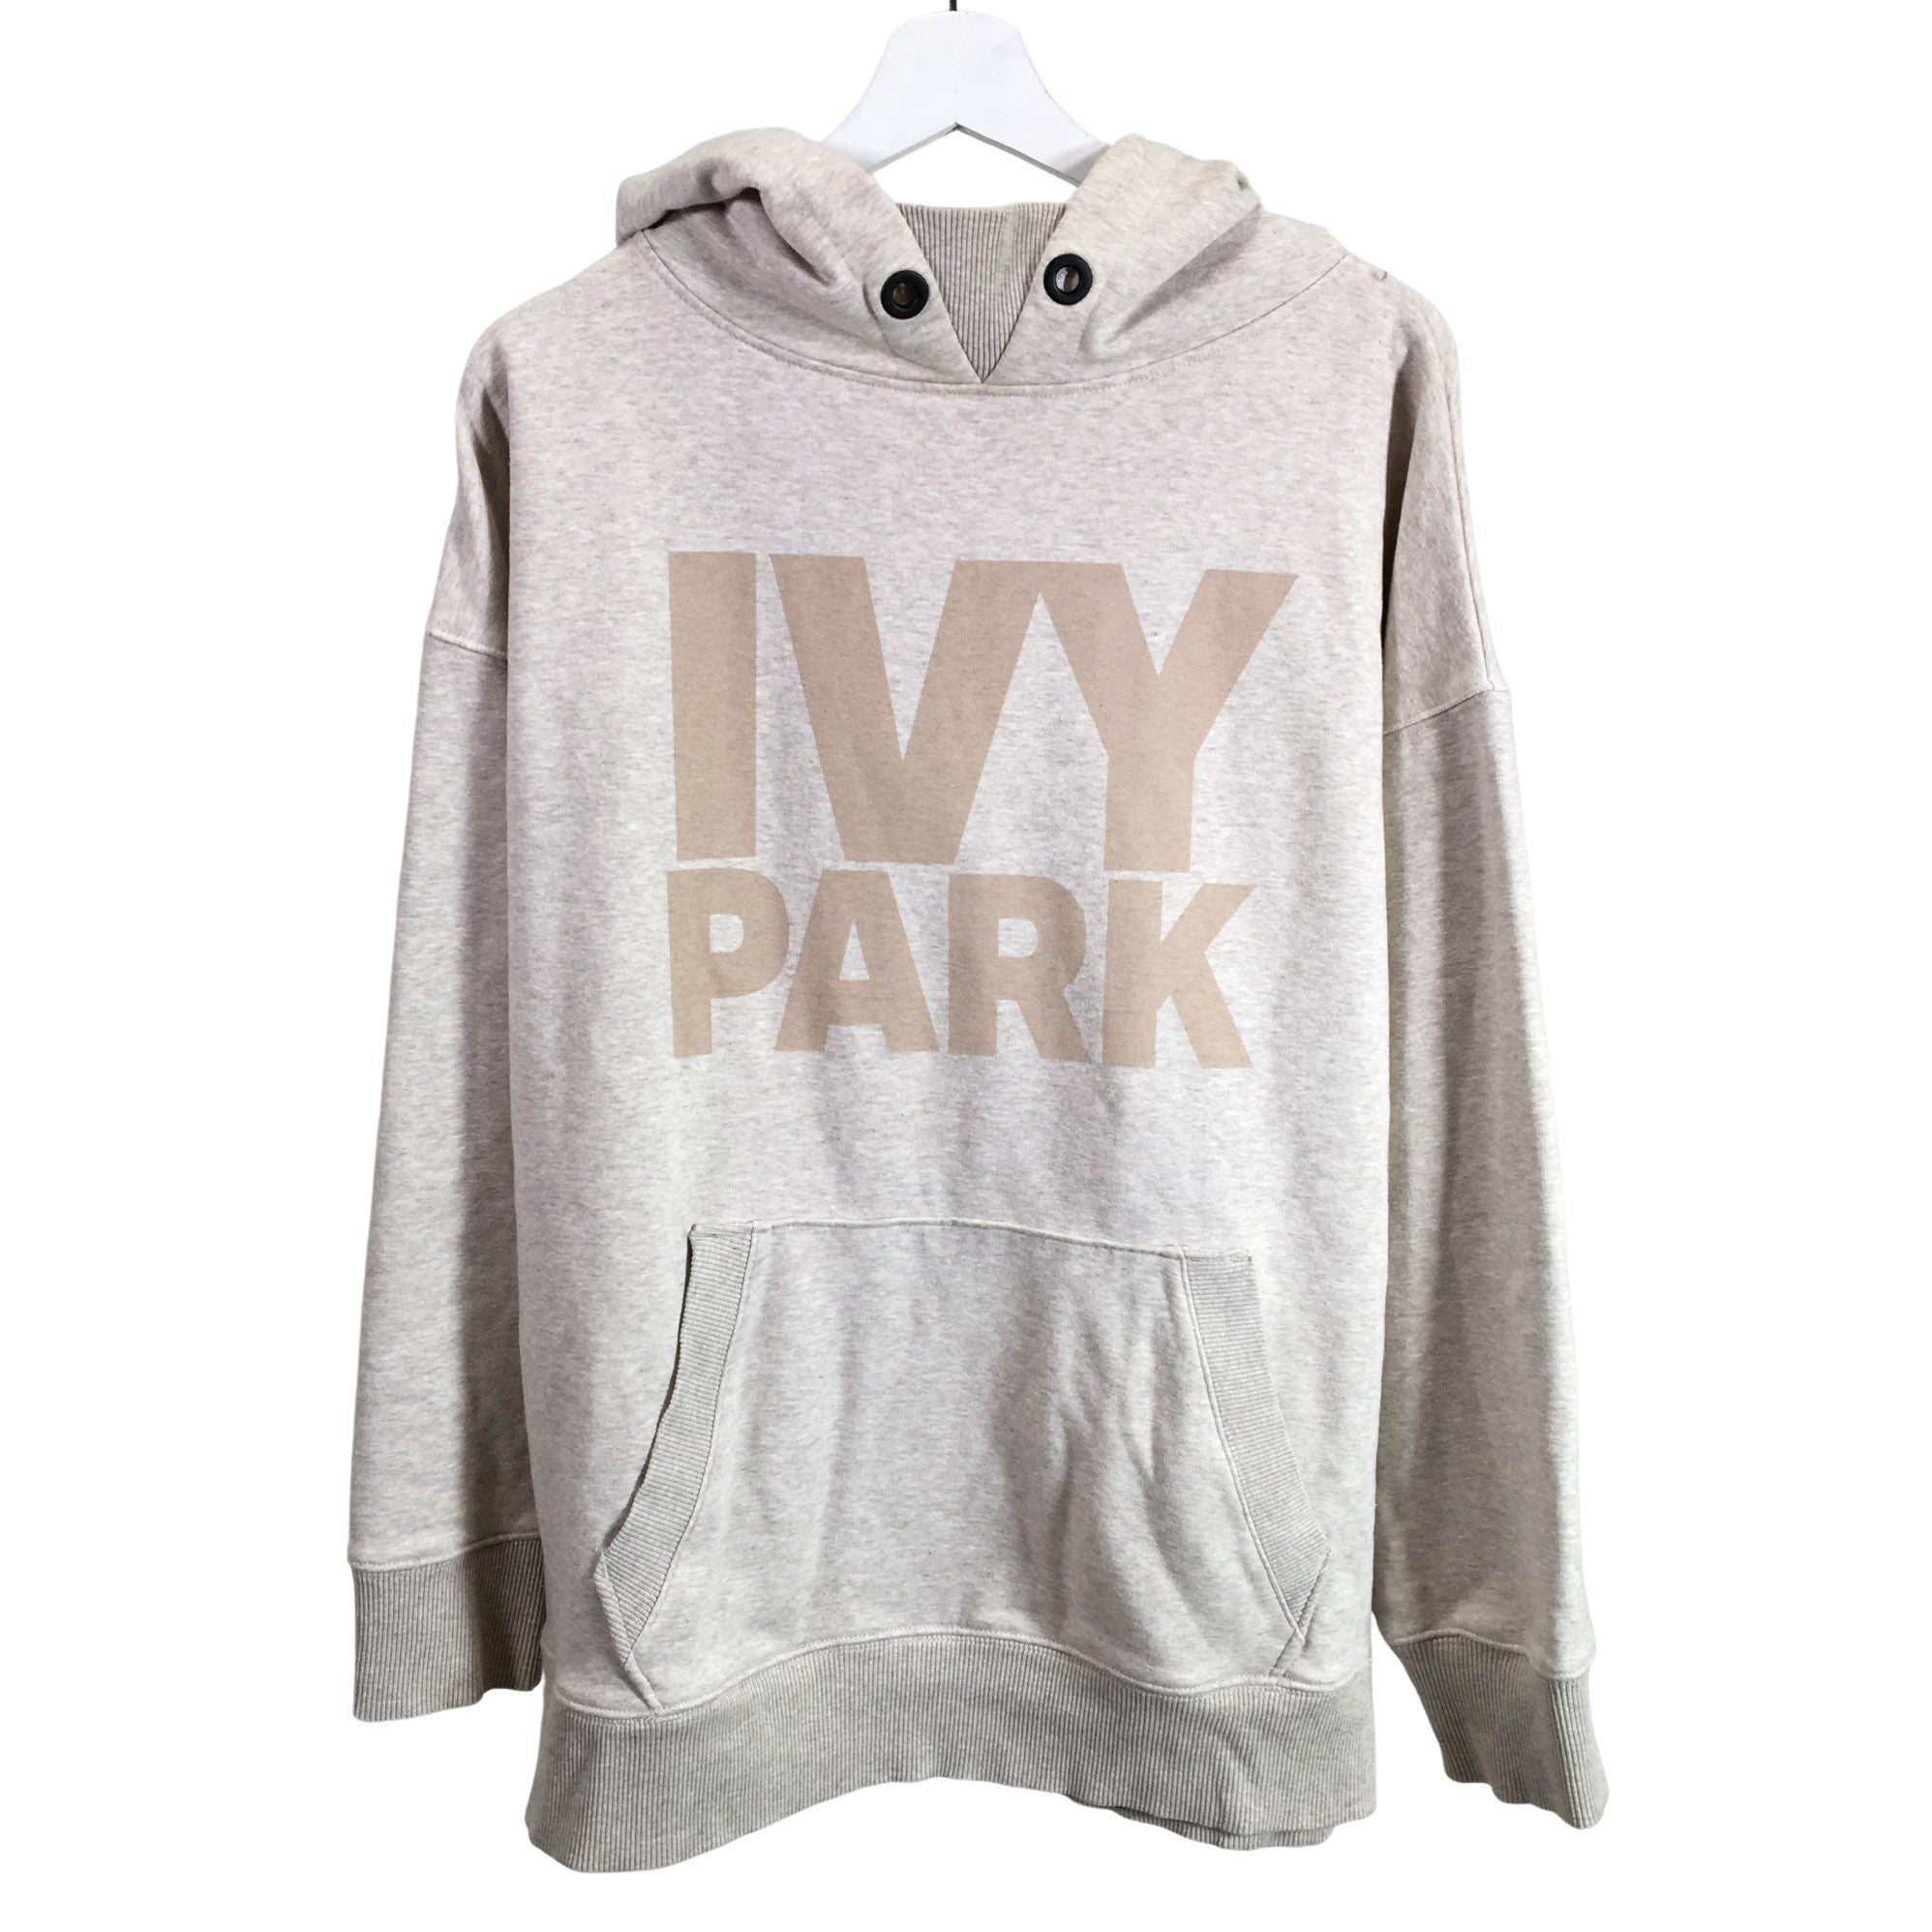 Beyonce Ivy Park Collection Beyonce Ivy Park Clothing, 51% OFF